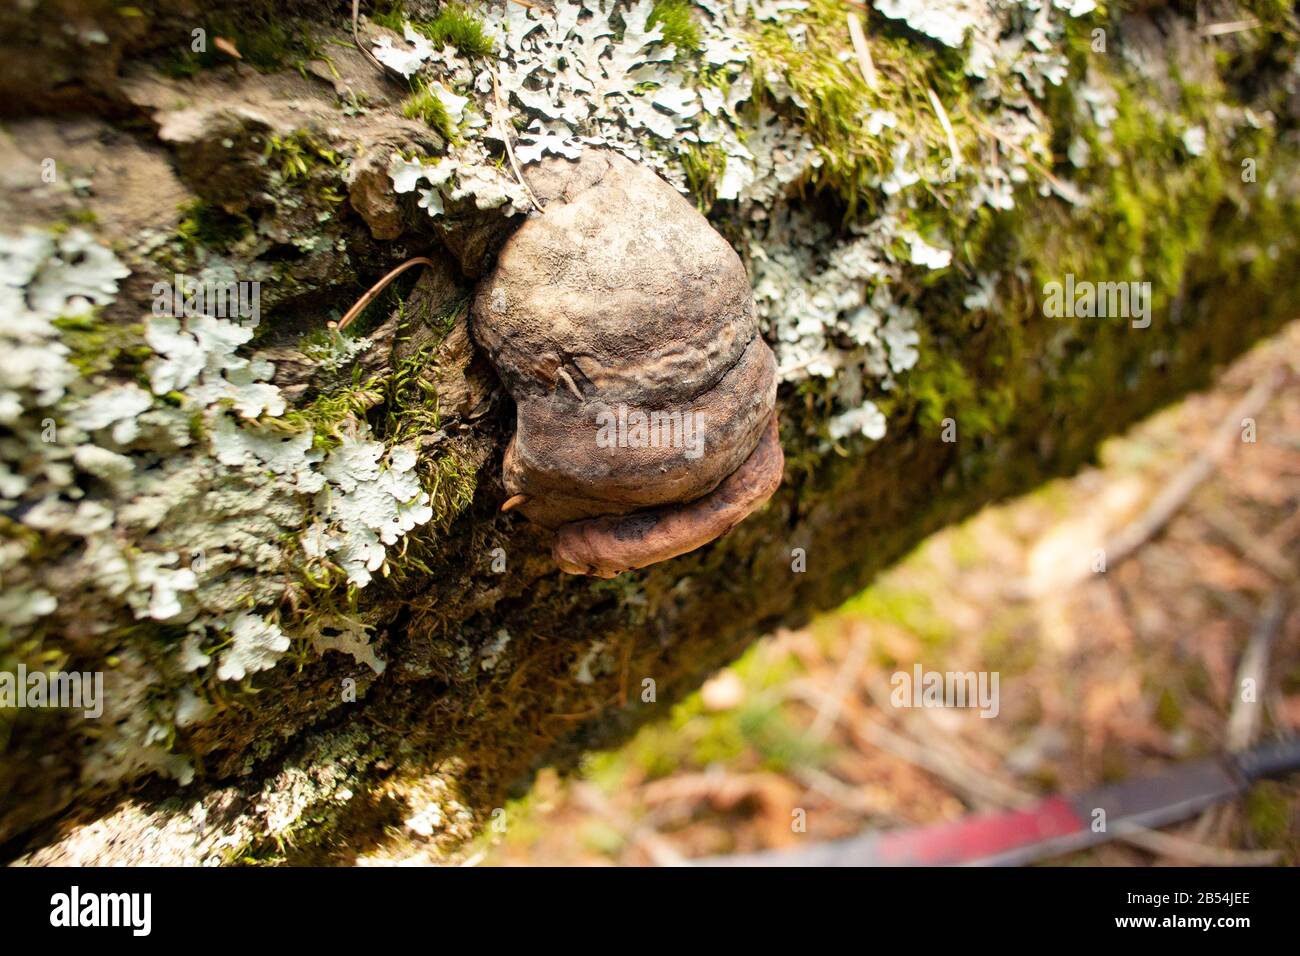 A Tinder Conk mushroom, Fomes fomentarius, growing on a dead, moss covered red birch tree, Betula occidentalis, along the lower end of Callahan Creek, Stock Photo